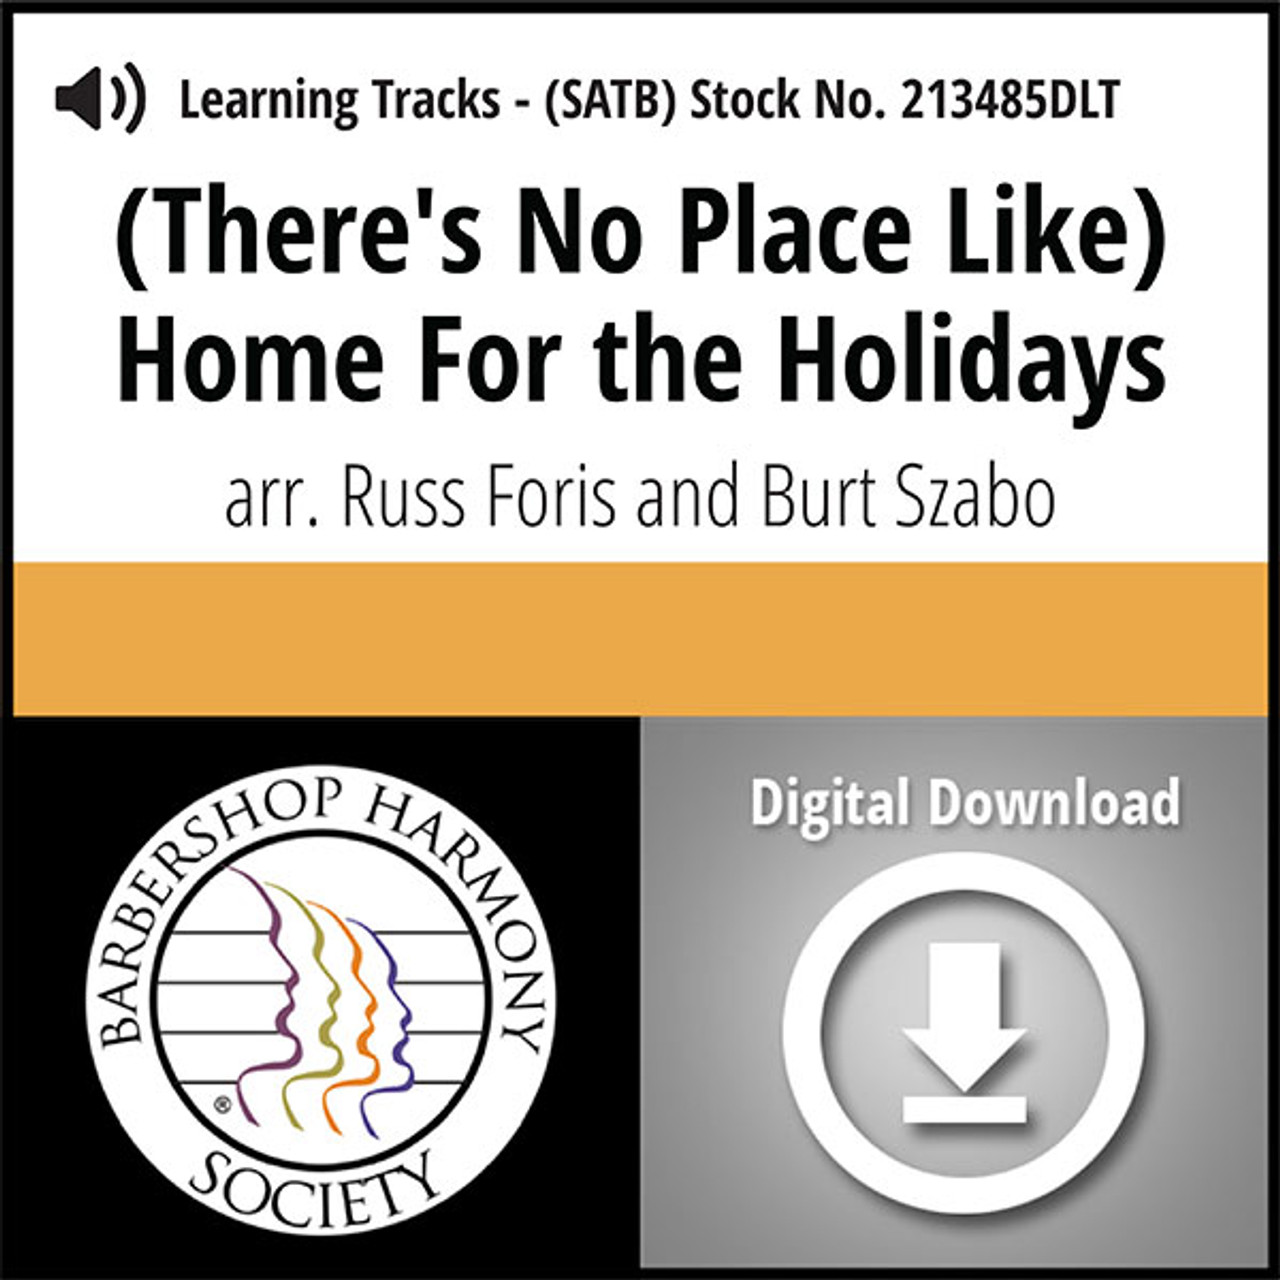 (There's No Place Like) Home for the Holidays (SATB) (arr. Foris & Szabo) - Digital Learning Tracks for 213483